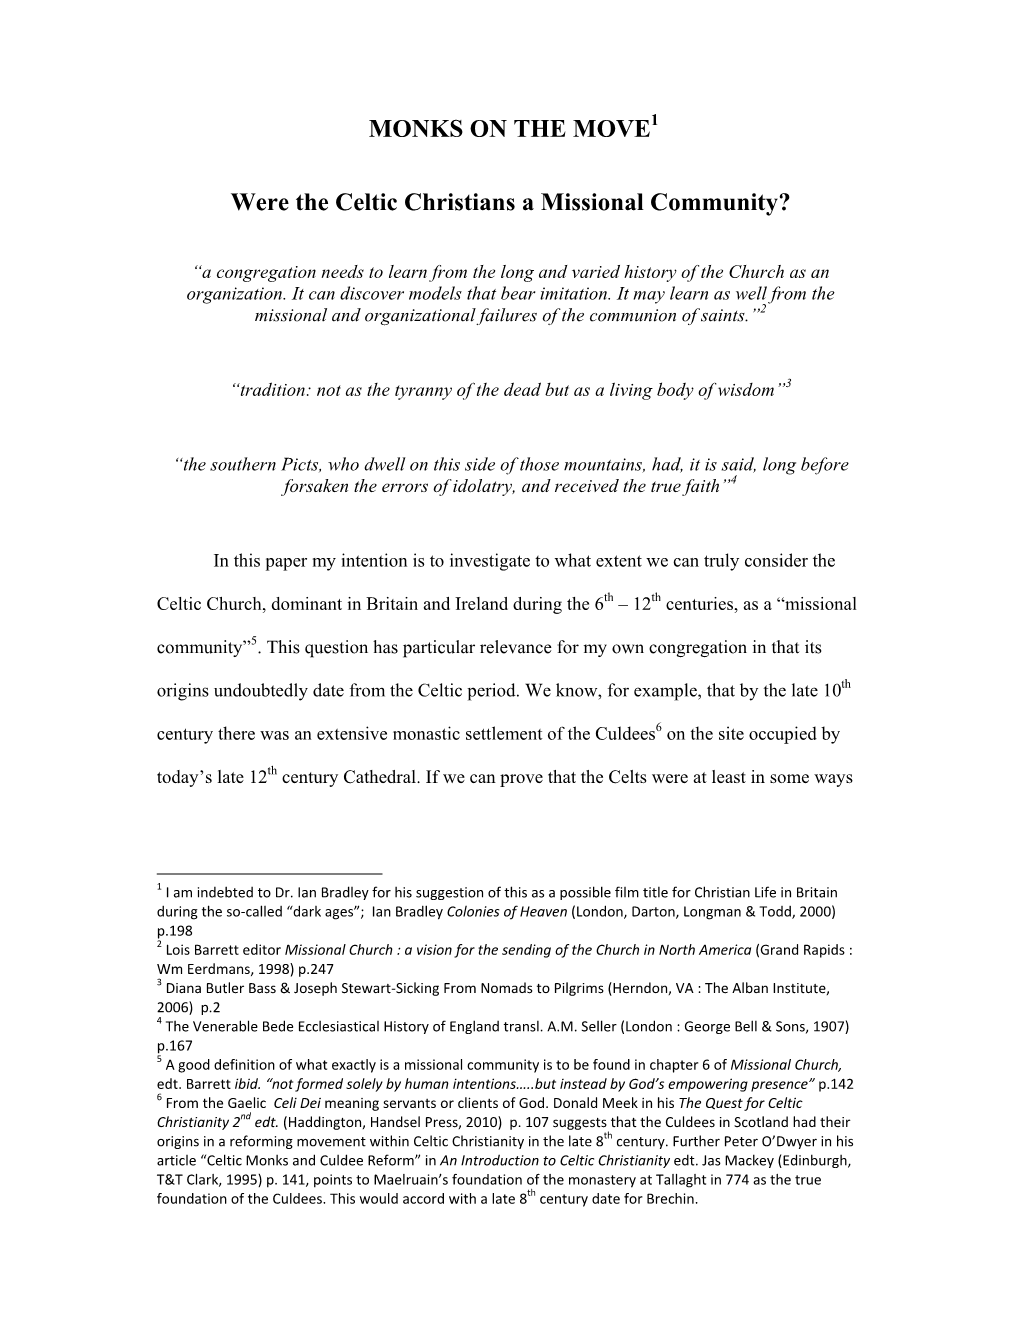 Were the Celtic Christians a Missional Community?